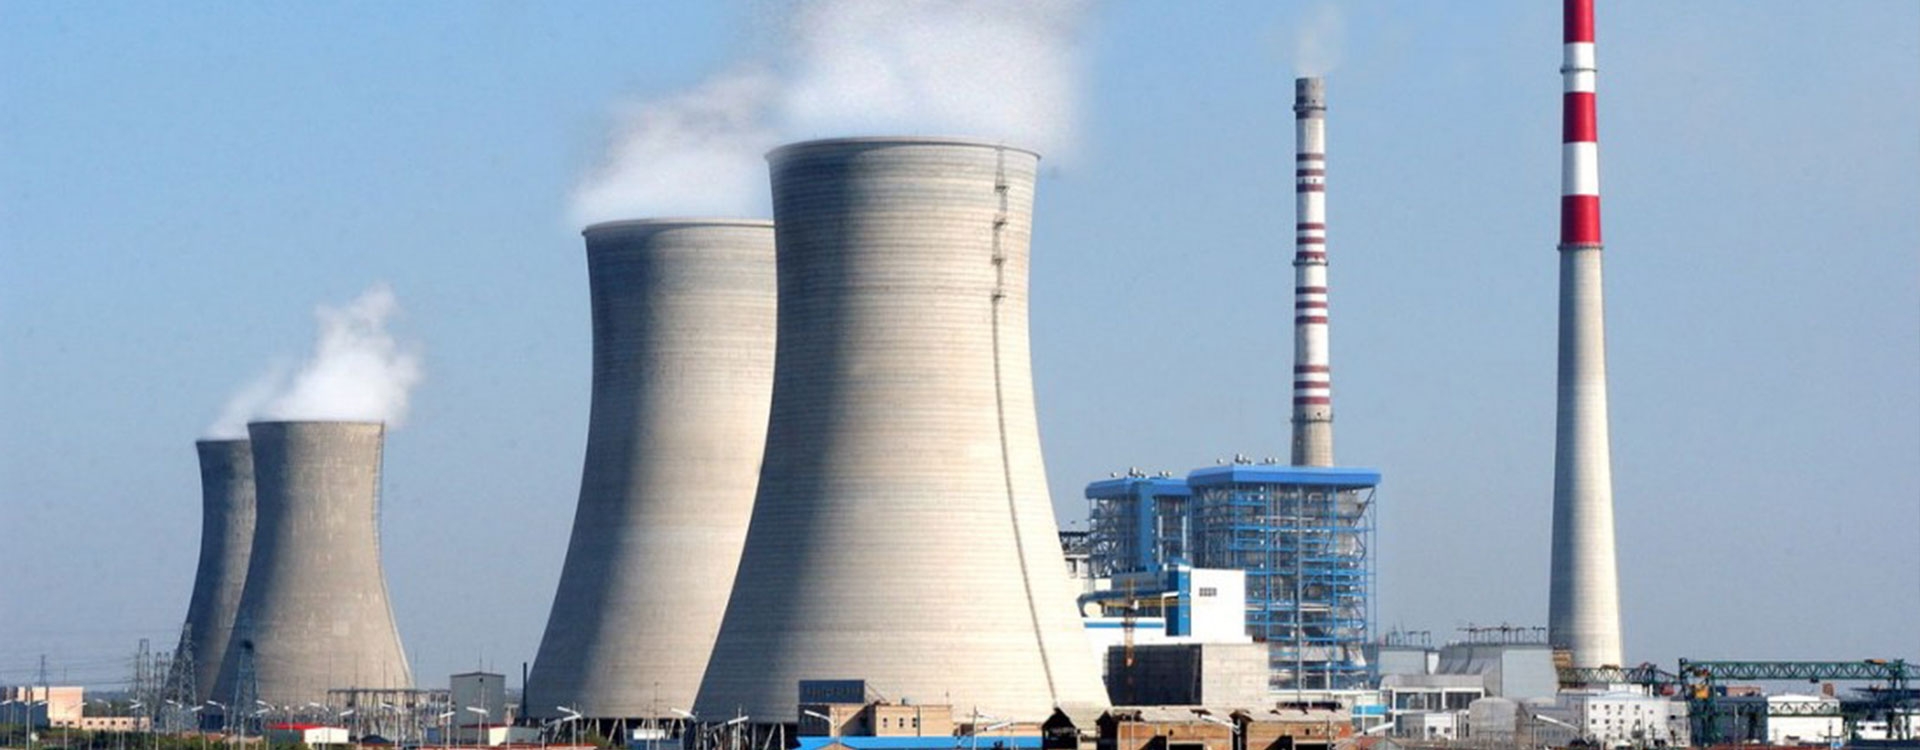 Coal Fired Thermal Power Plants